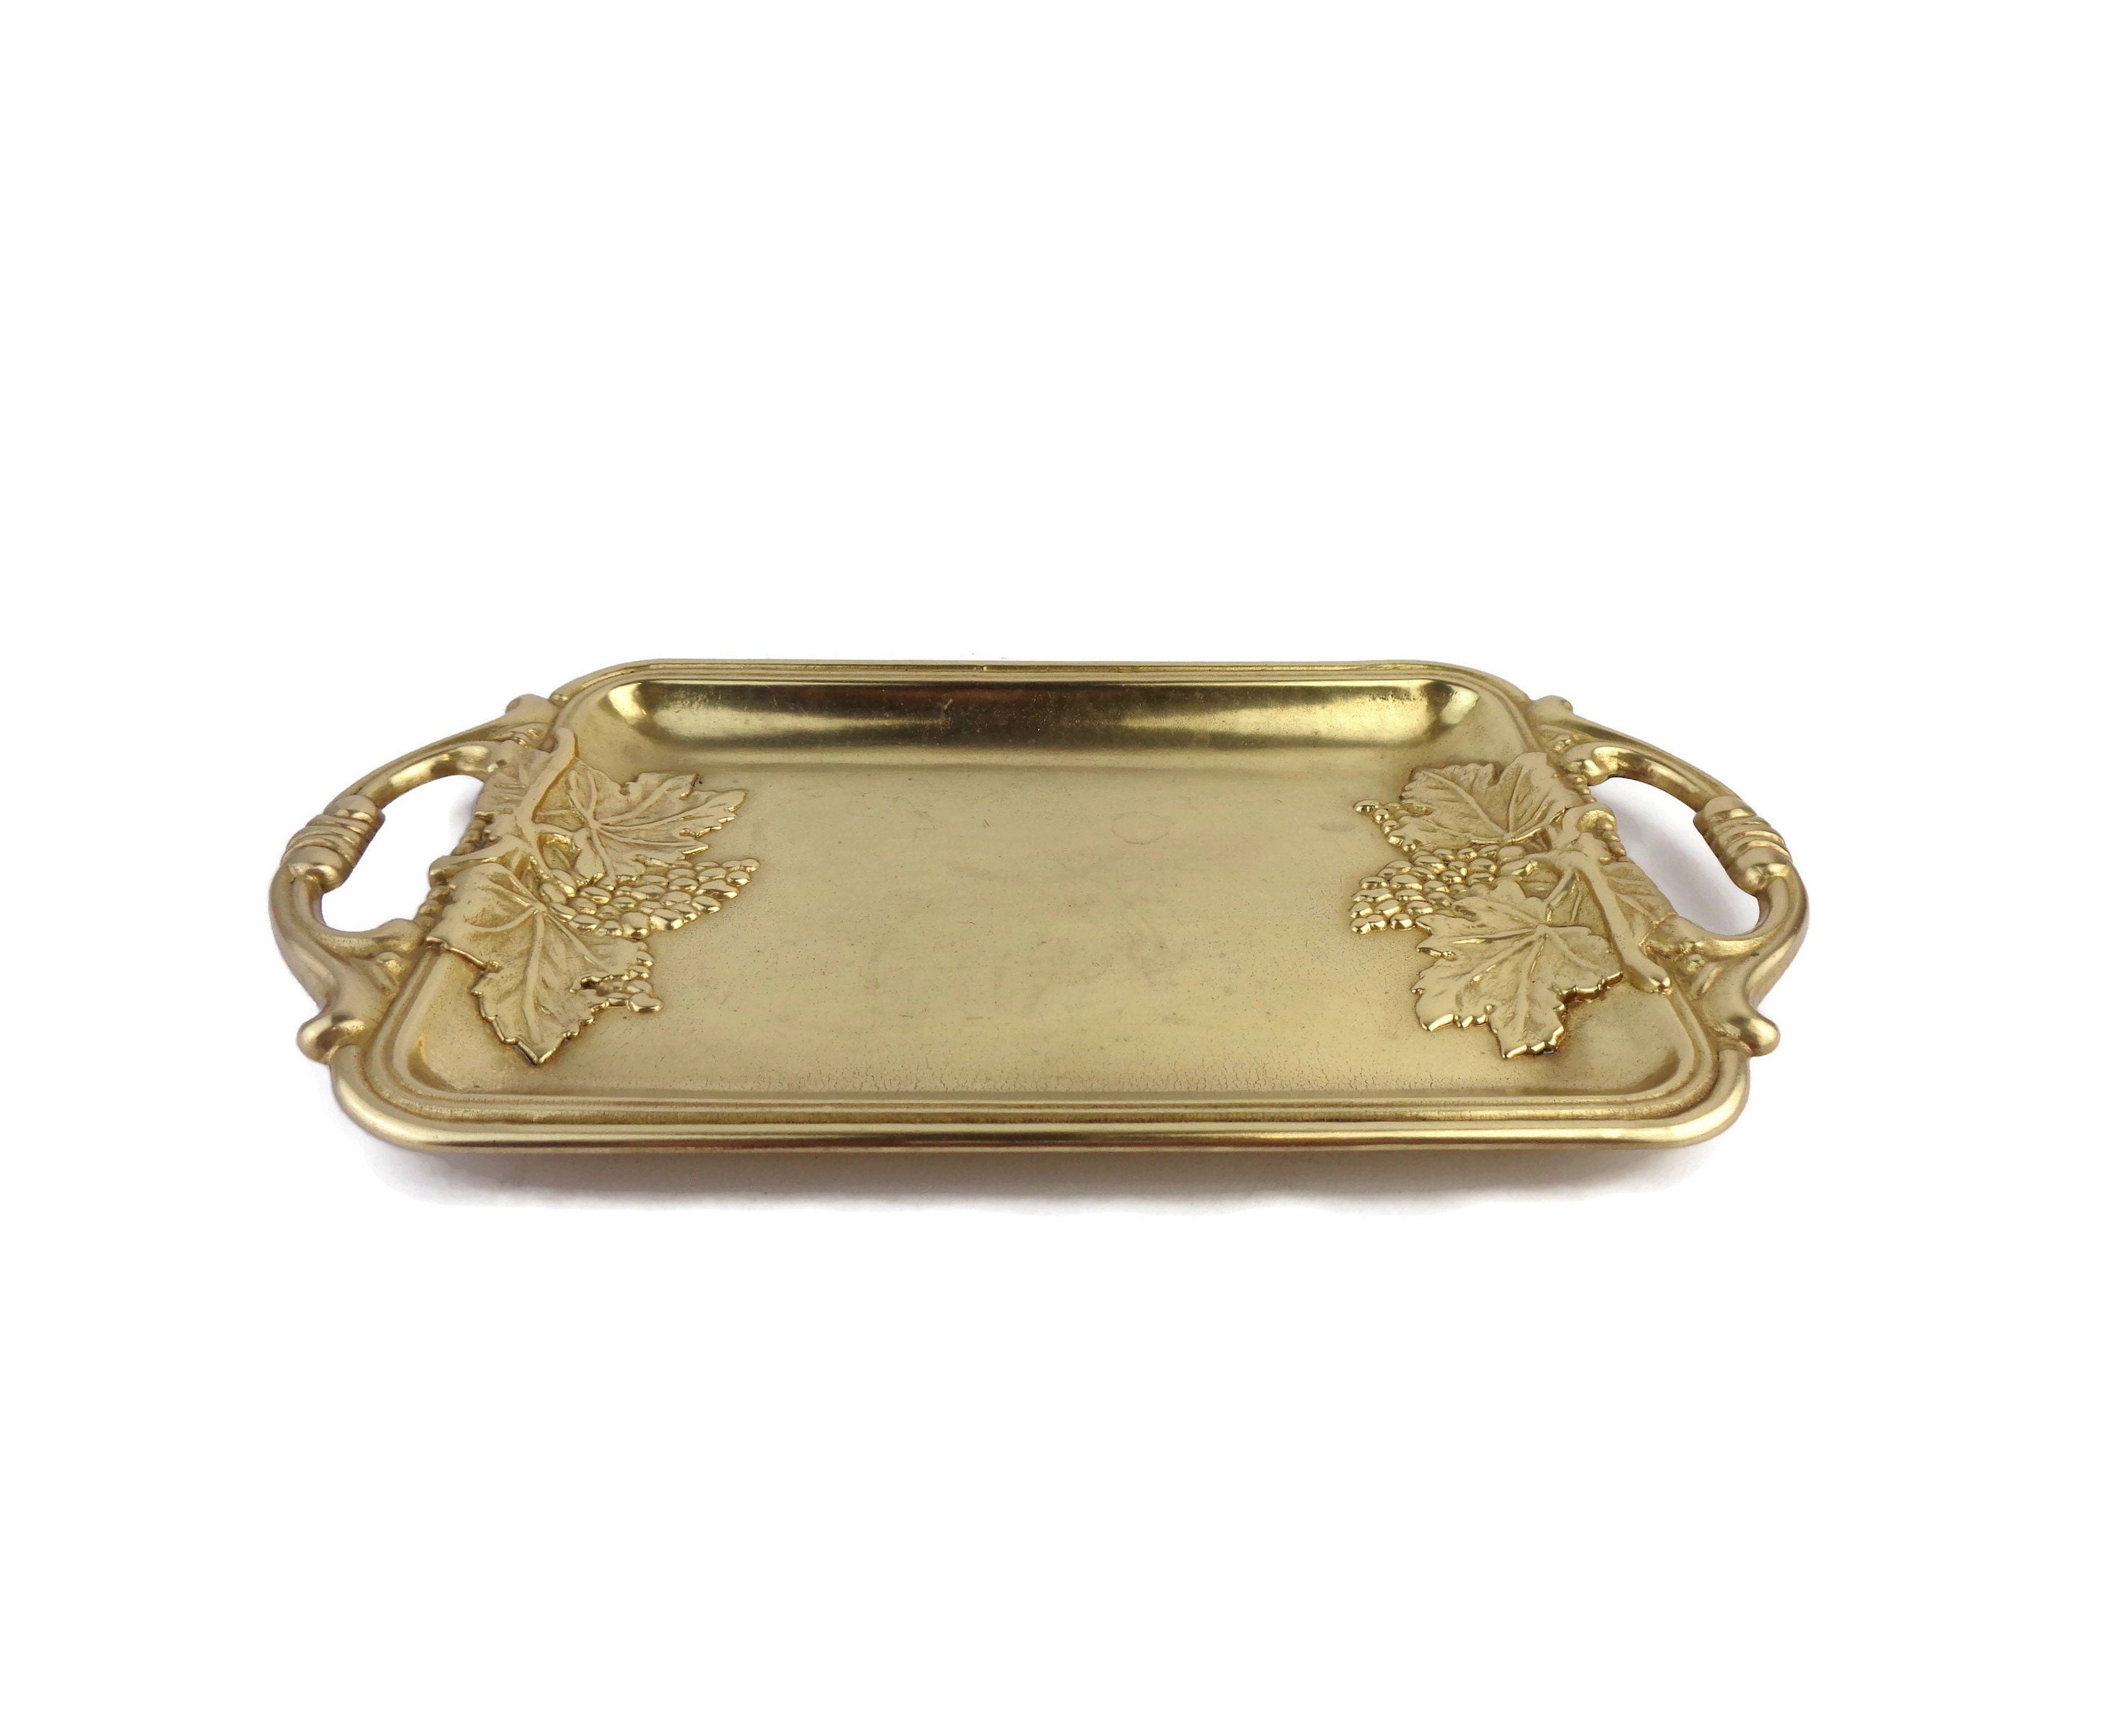 Quick´n´easy: Autosol® Metal Polish on a brass tray (with